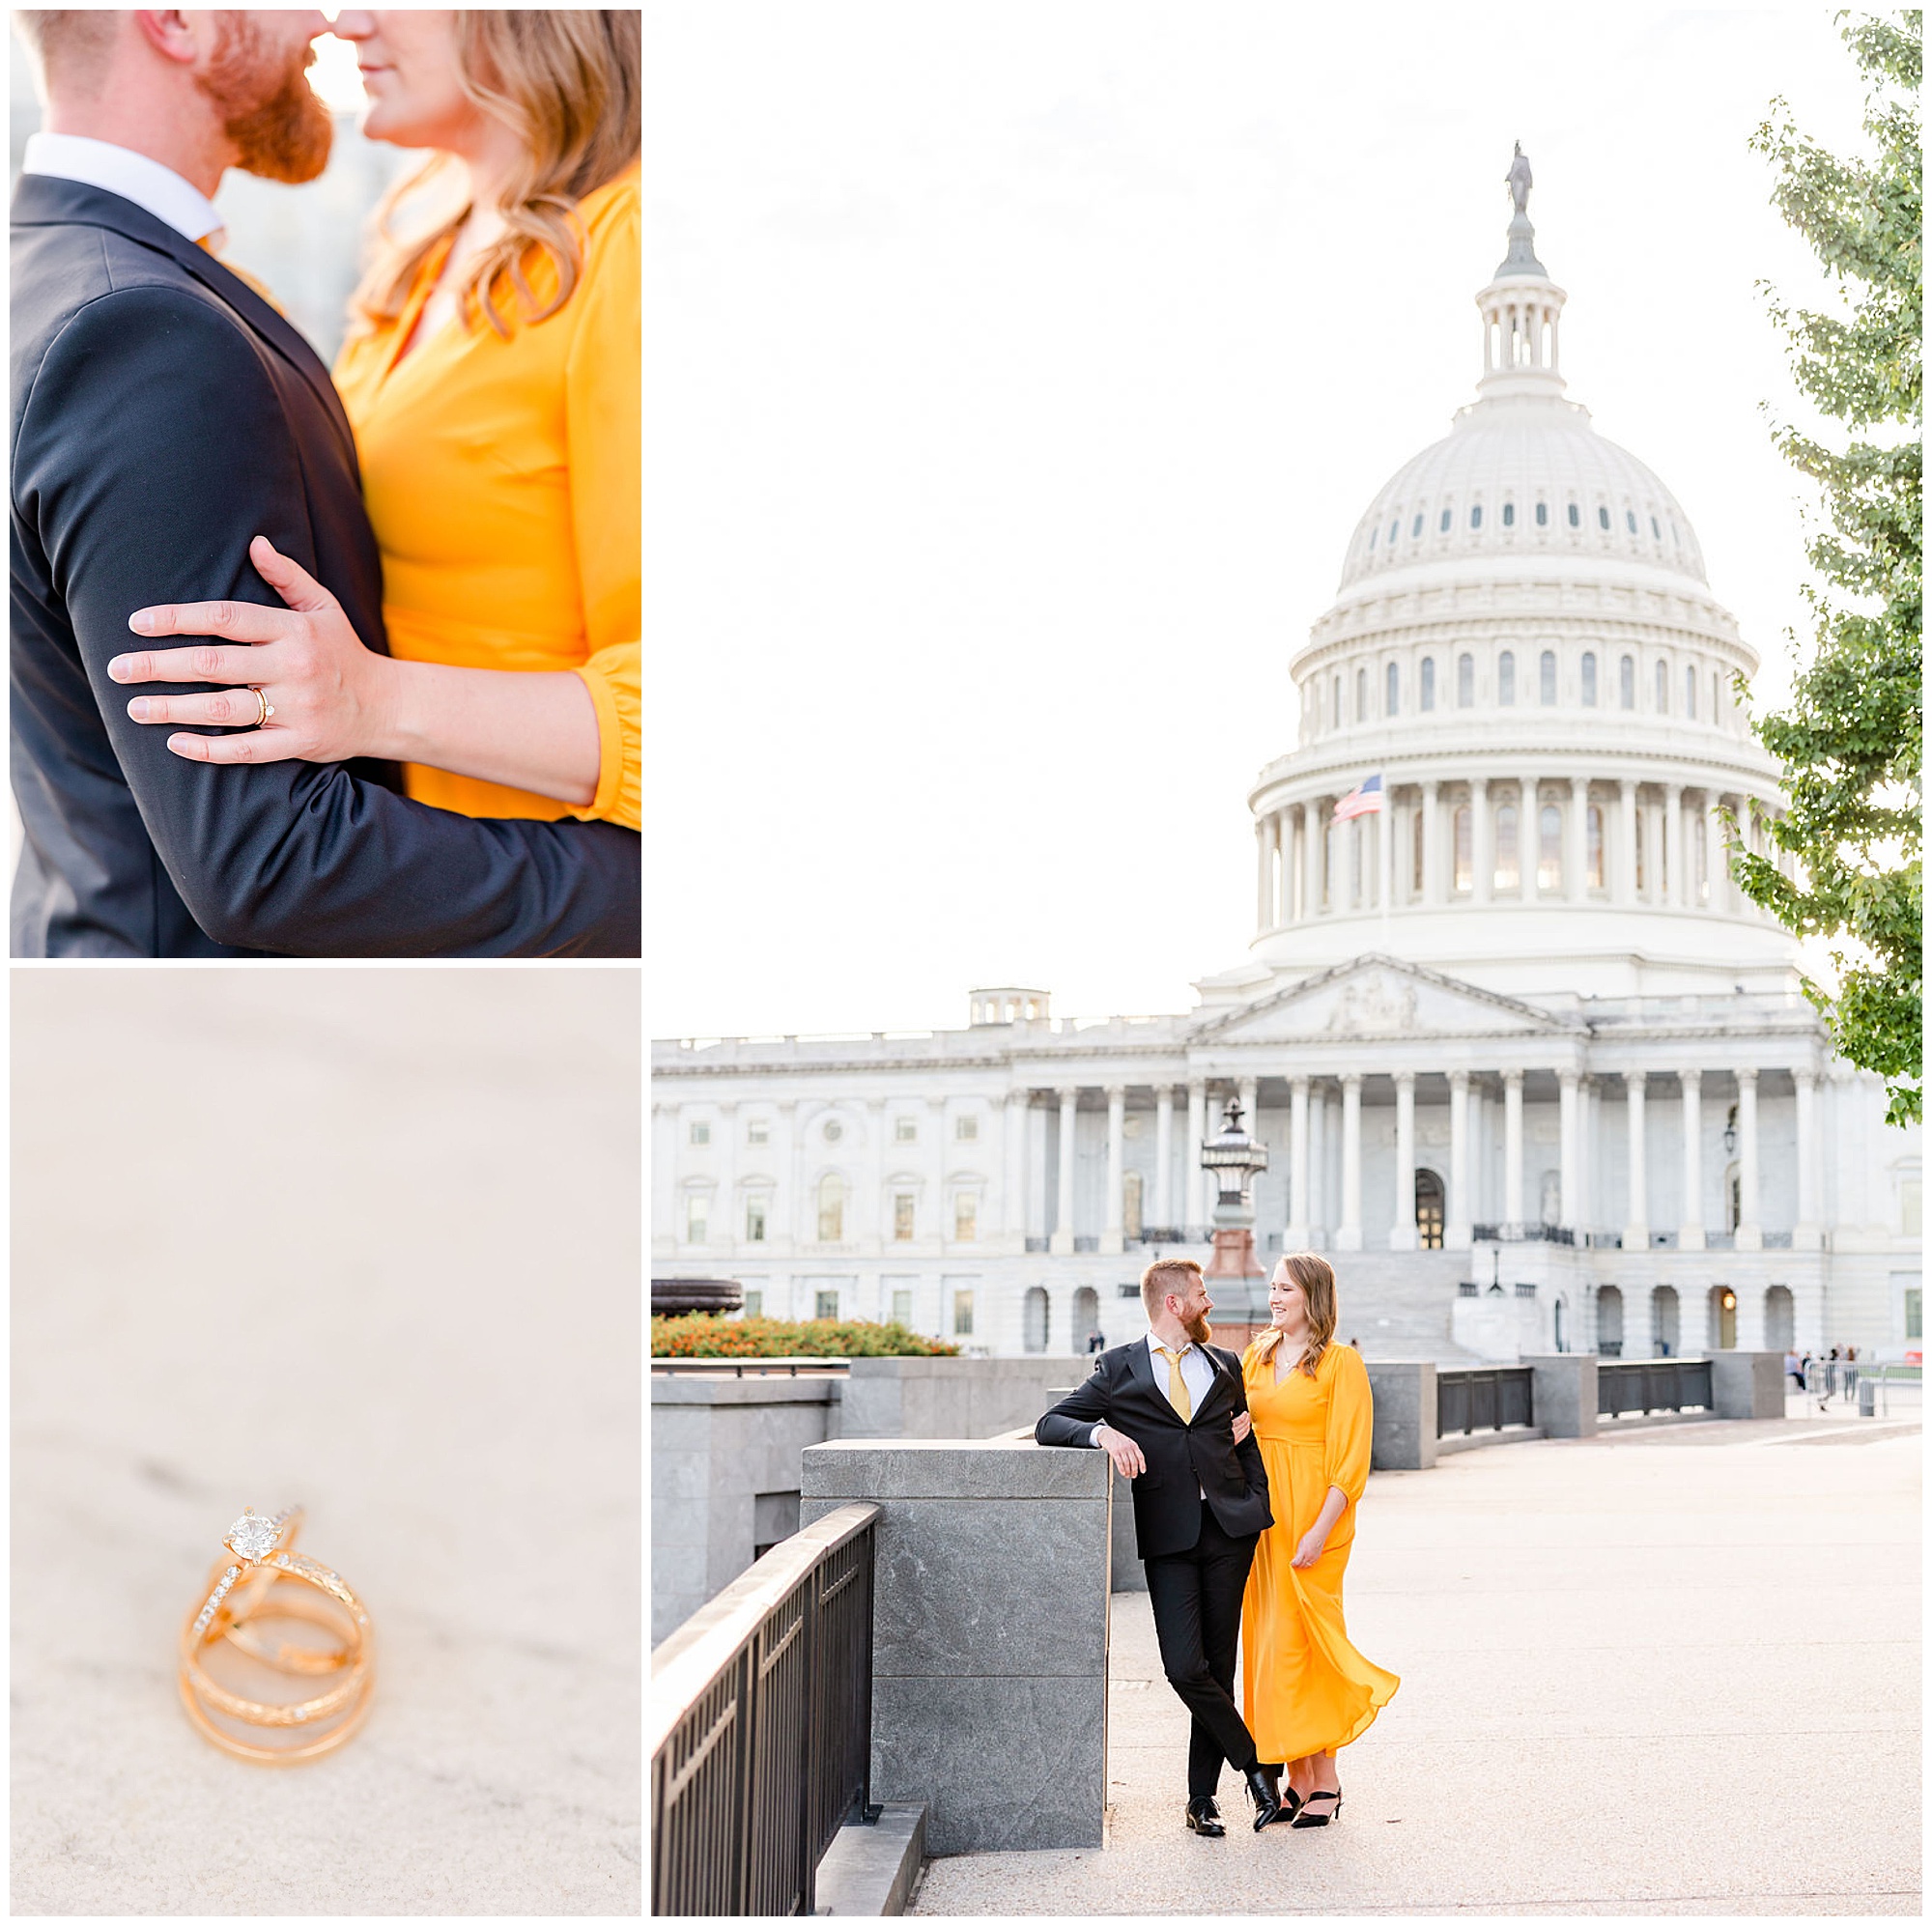 glowing Capitol Hill elopement portraits, Capitol Hill Washington DC, DC elopement portraits, DC elopement photographer, DC wedding photographer, DC portrait photographer, DC photographer, Capitol Hill portraits, autumn portraits, Capitol Hill photographer, Rachel E.H. Photography, rose gold wedding rings, womans hand on mans arm, closeup of wedding ring, couple smiling at each other, man leaning on stone